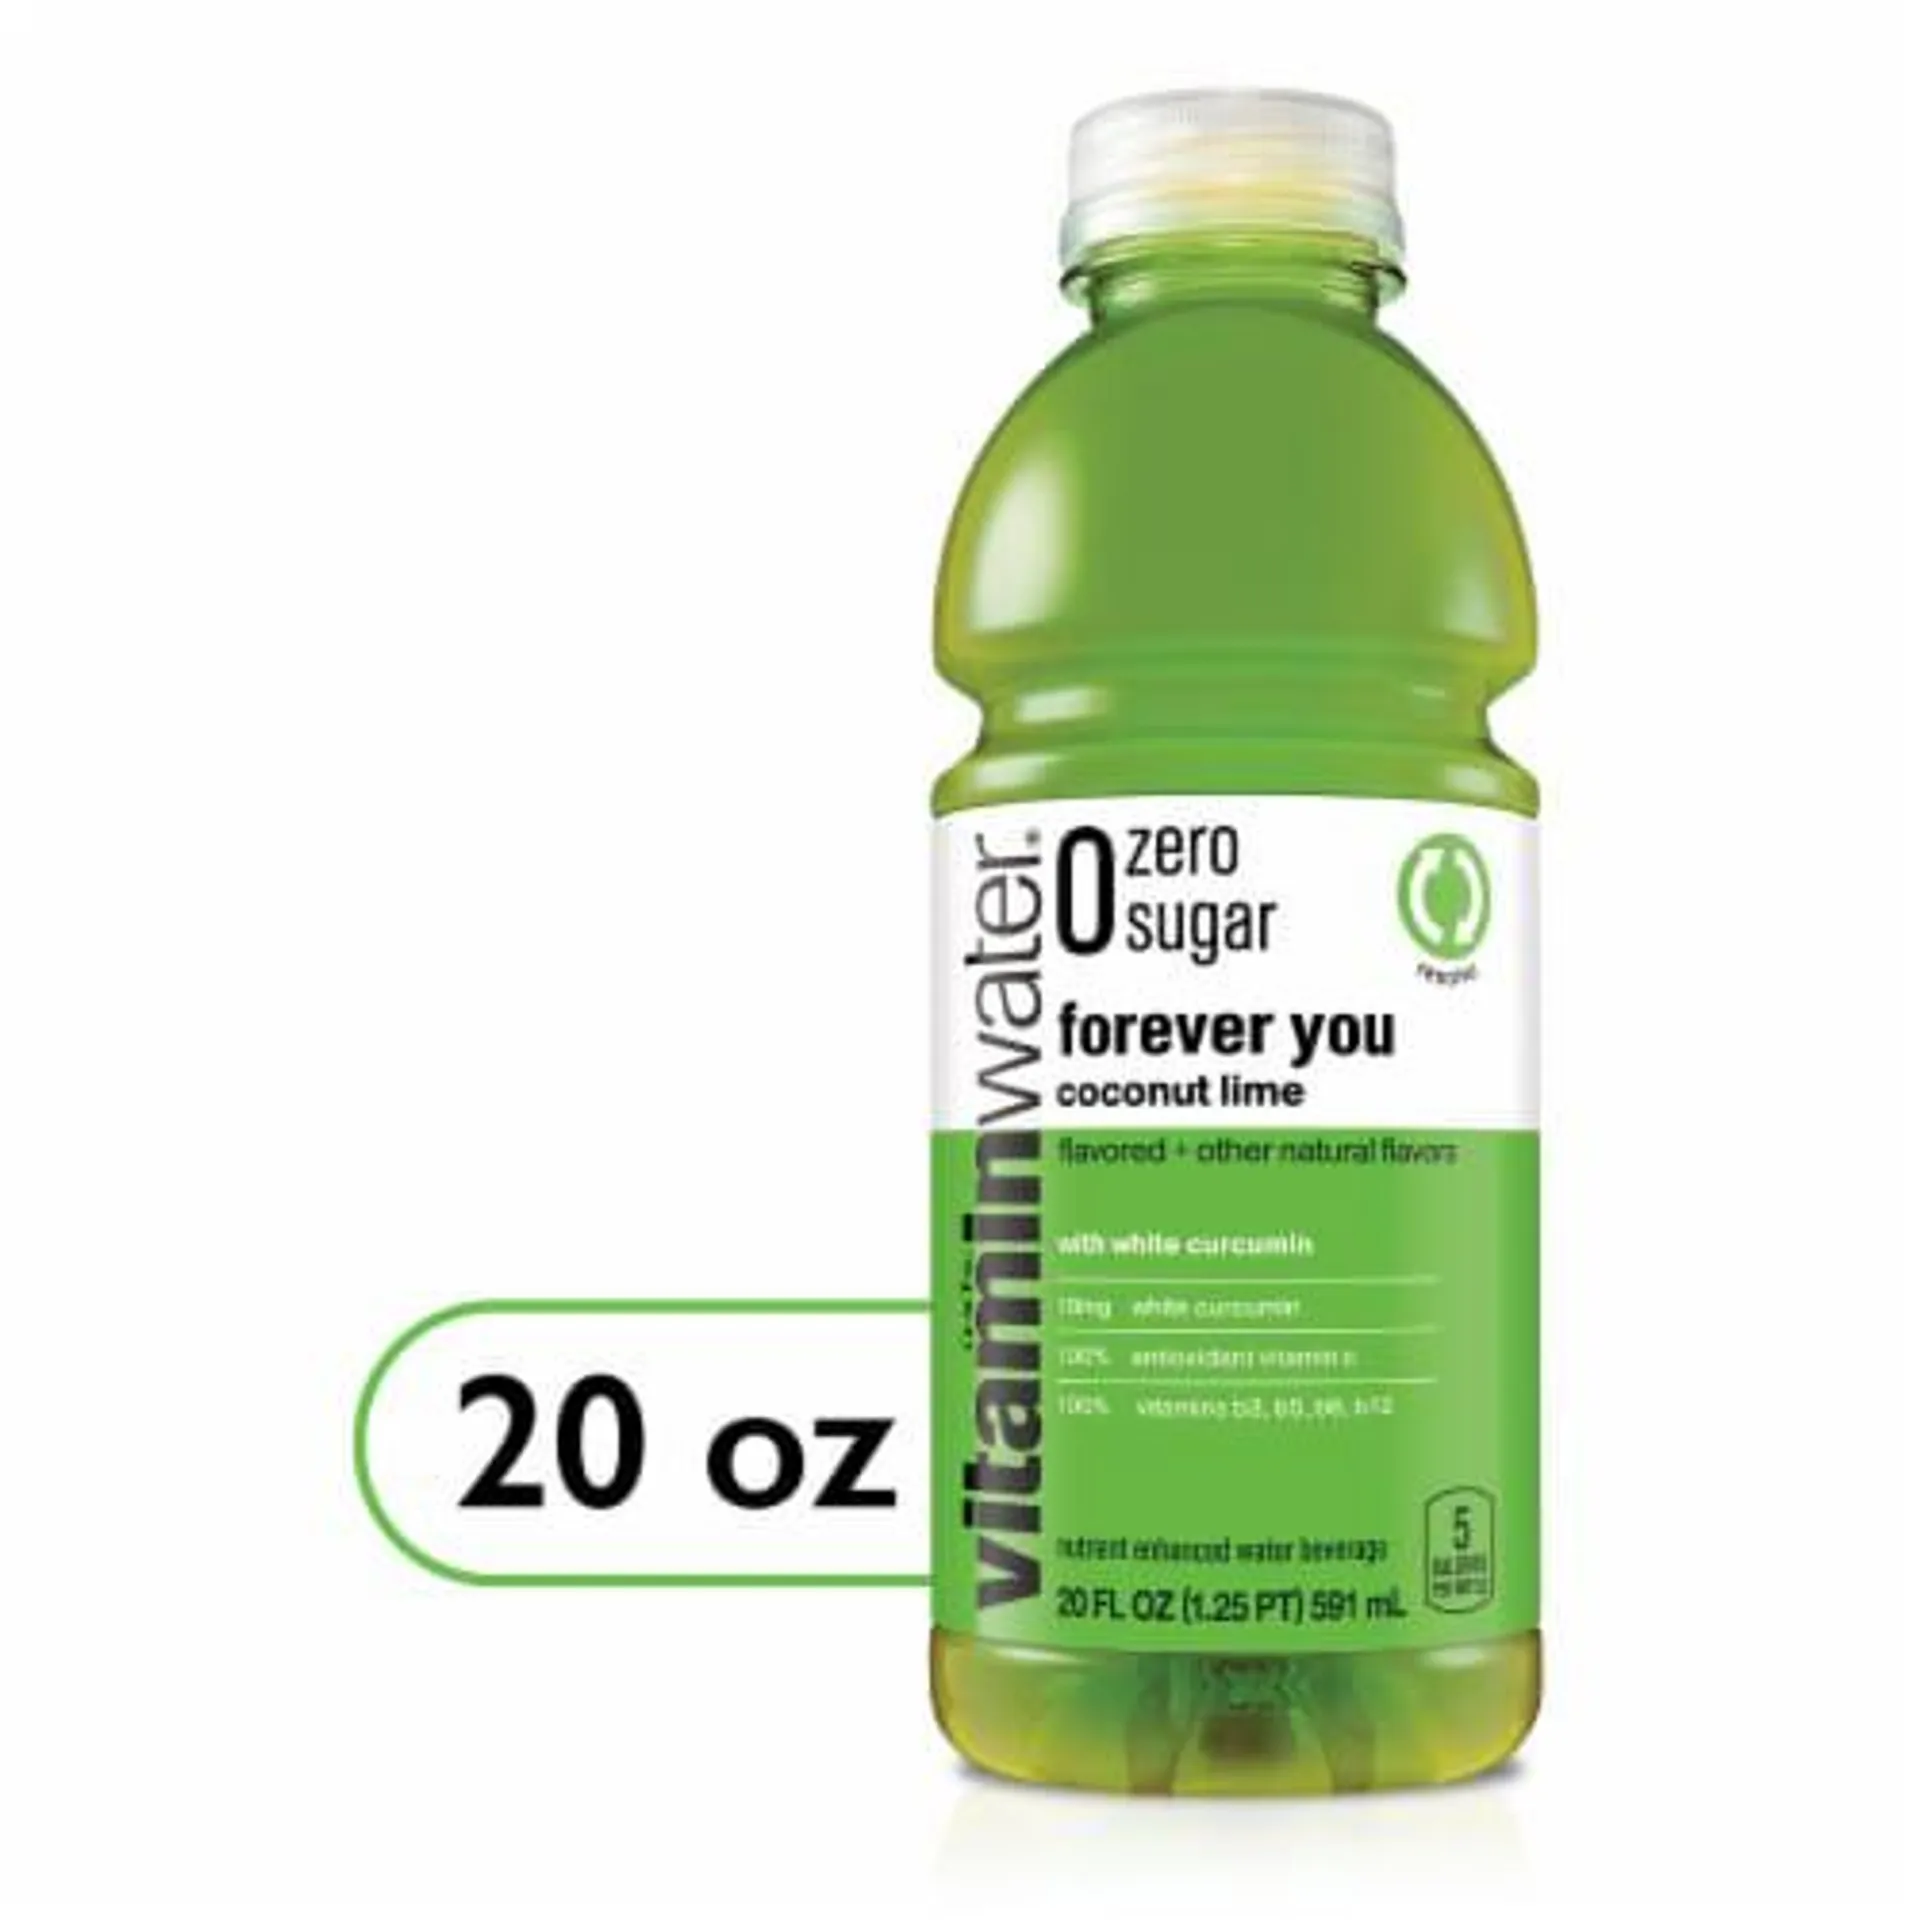 Vitaminwater® Forever You Coconut Lime Flavored Bottled Water